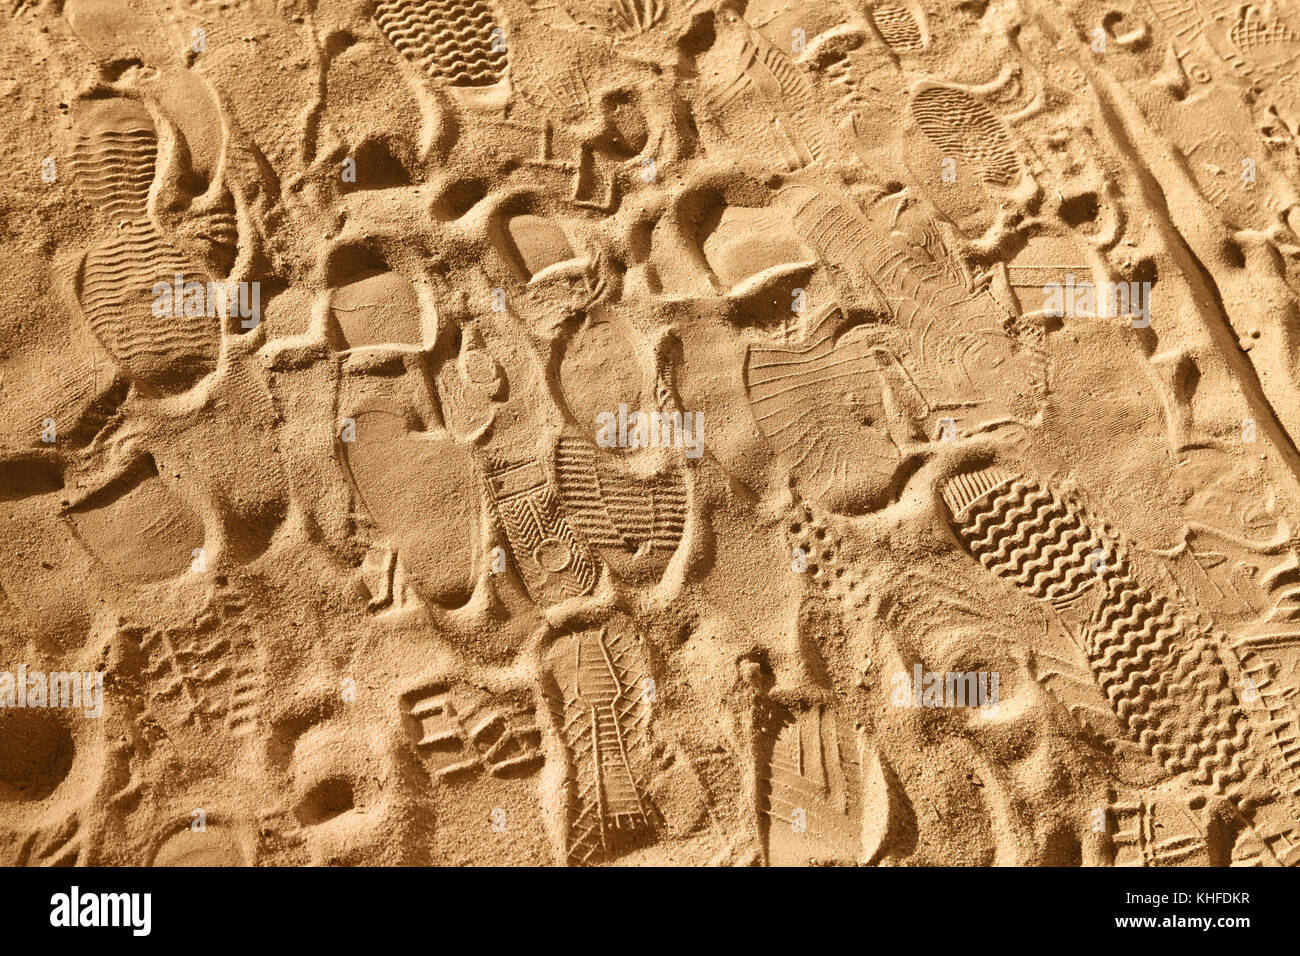 prints from various footwear on sand, background Stock Photo